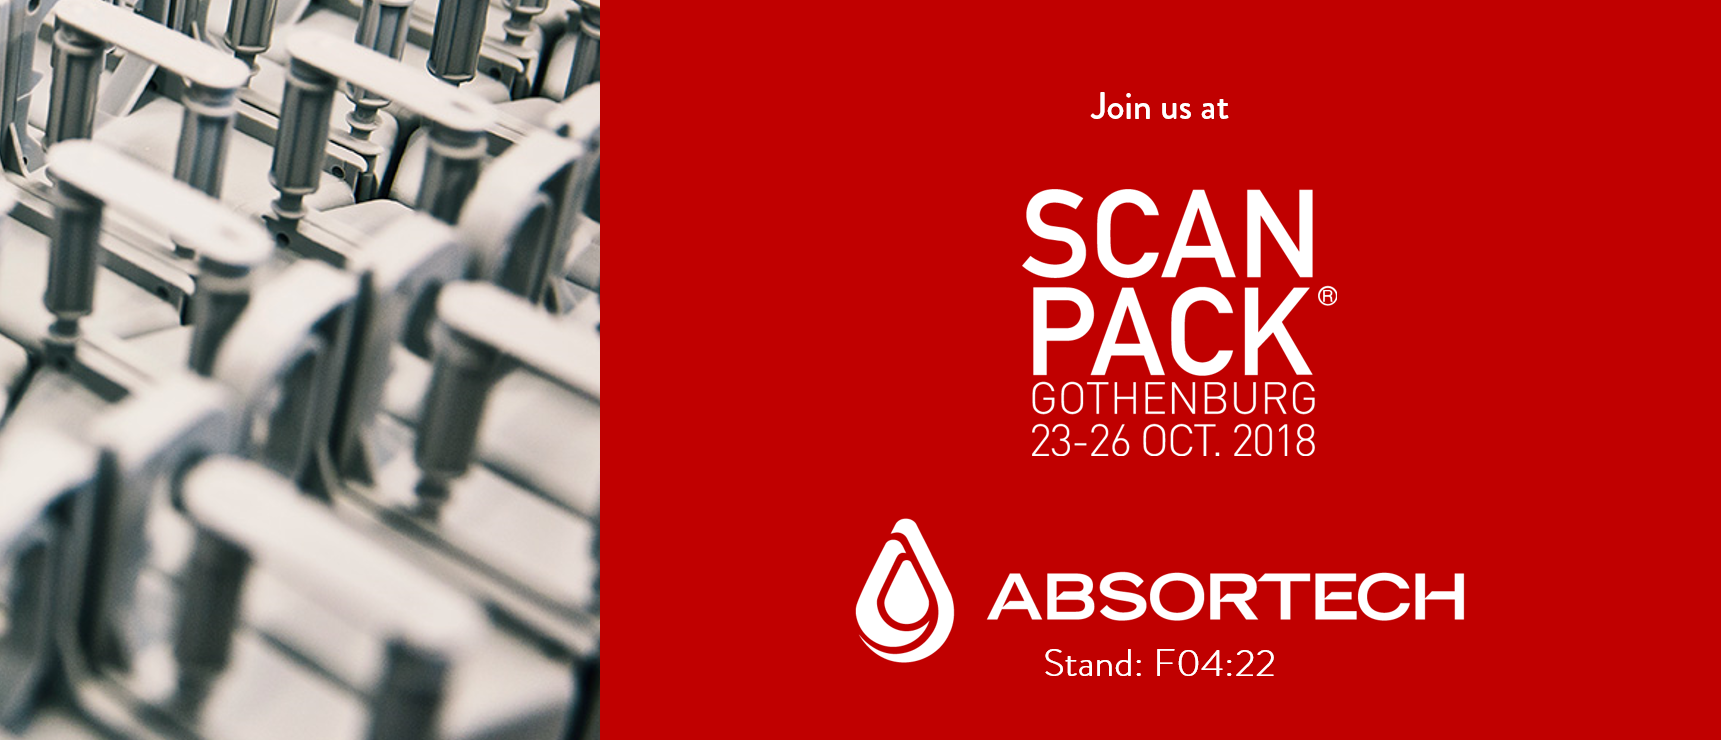 Absortech at ScanPack 2018